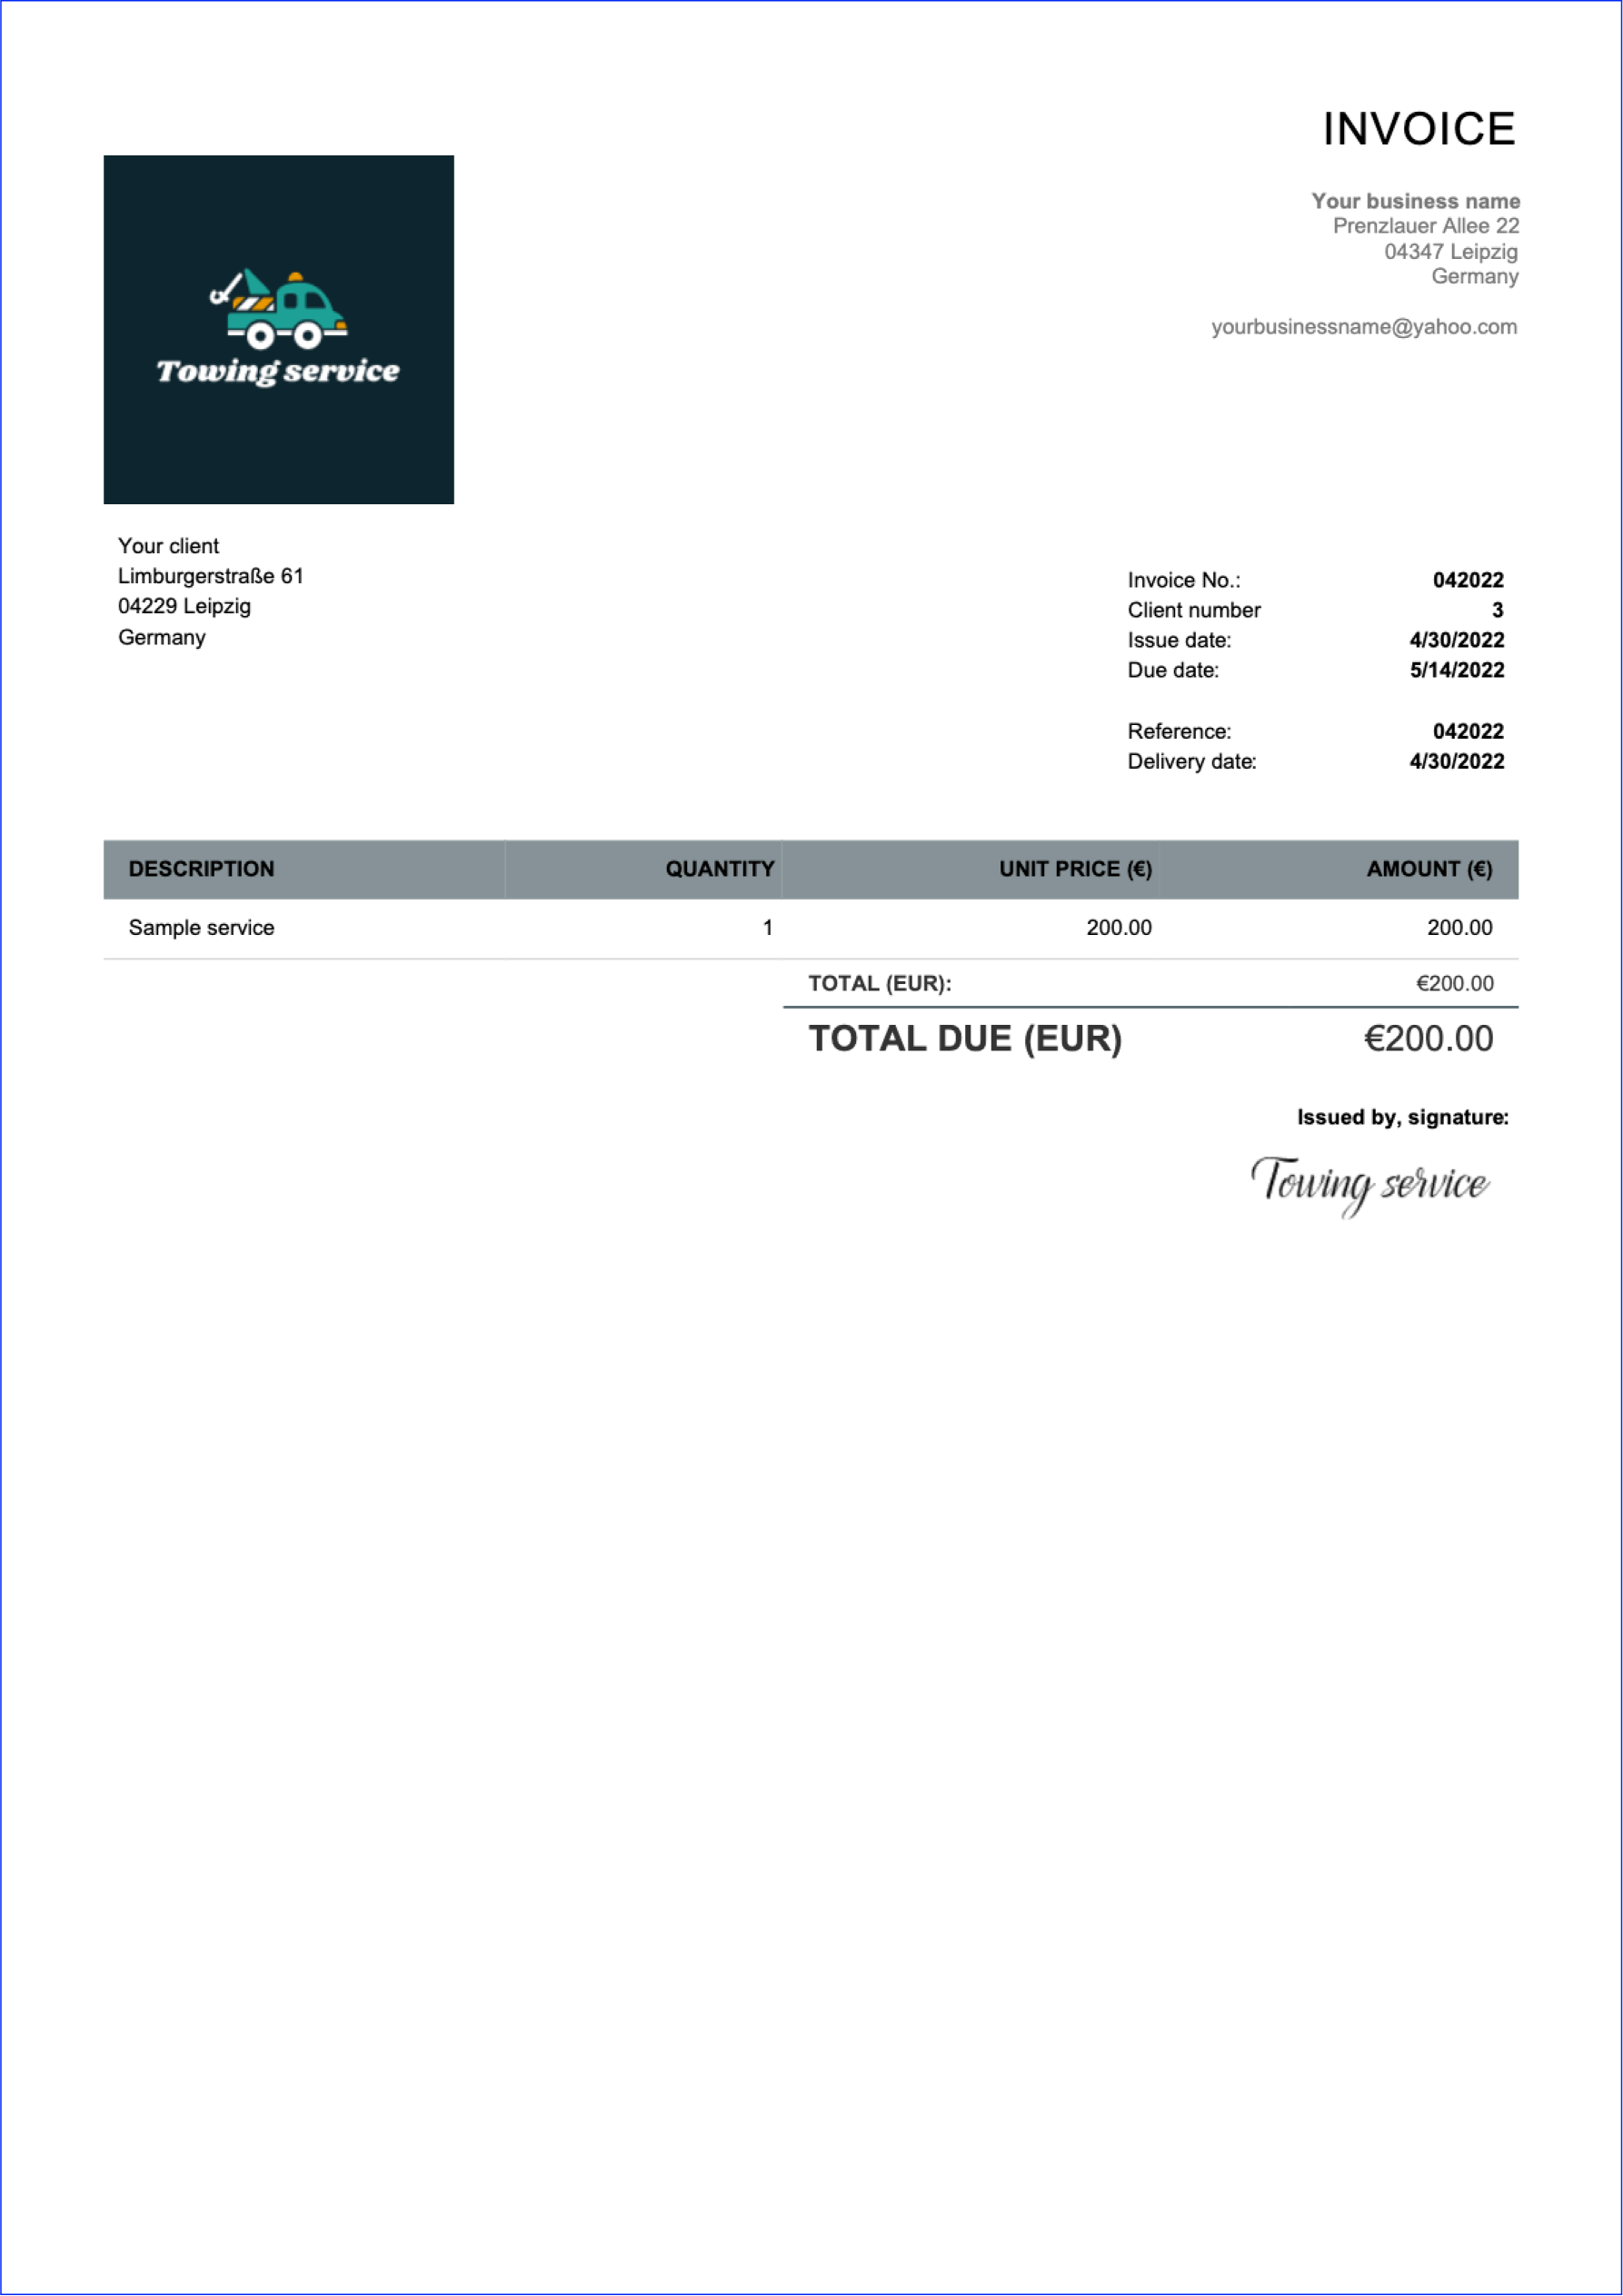 templates for invoices free excel